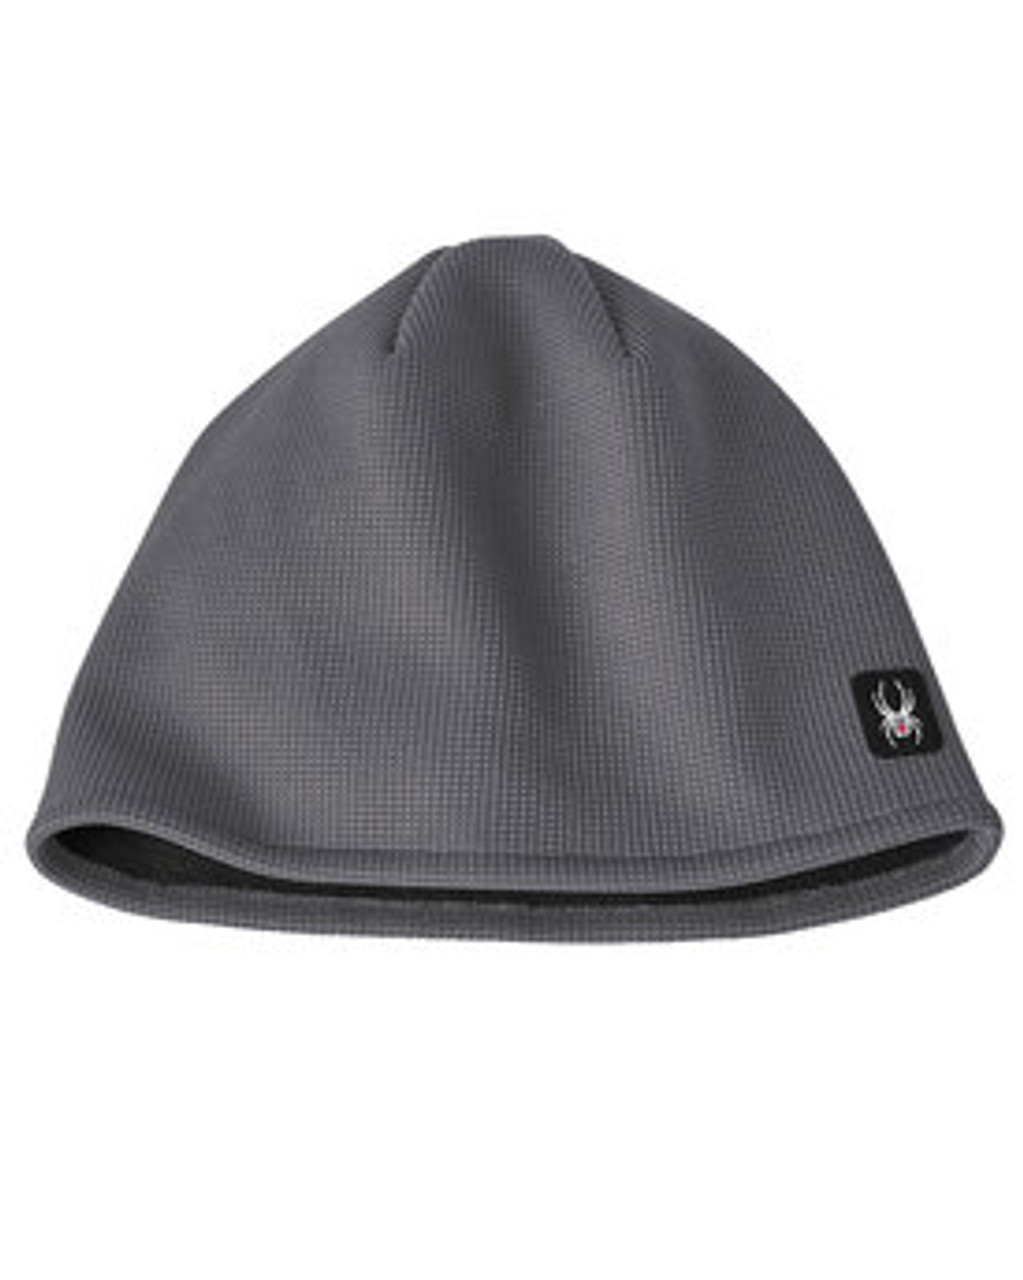 Spyder Adult Constant Sweater Beanie SH16794